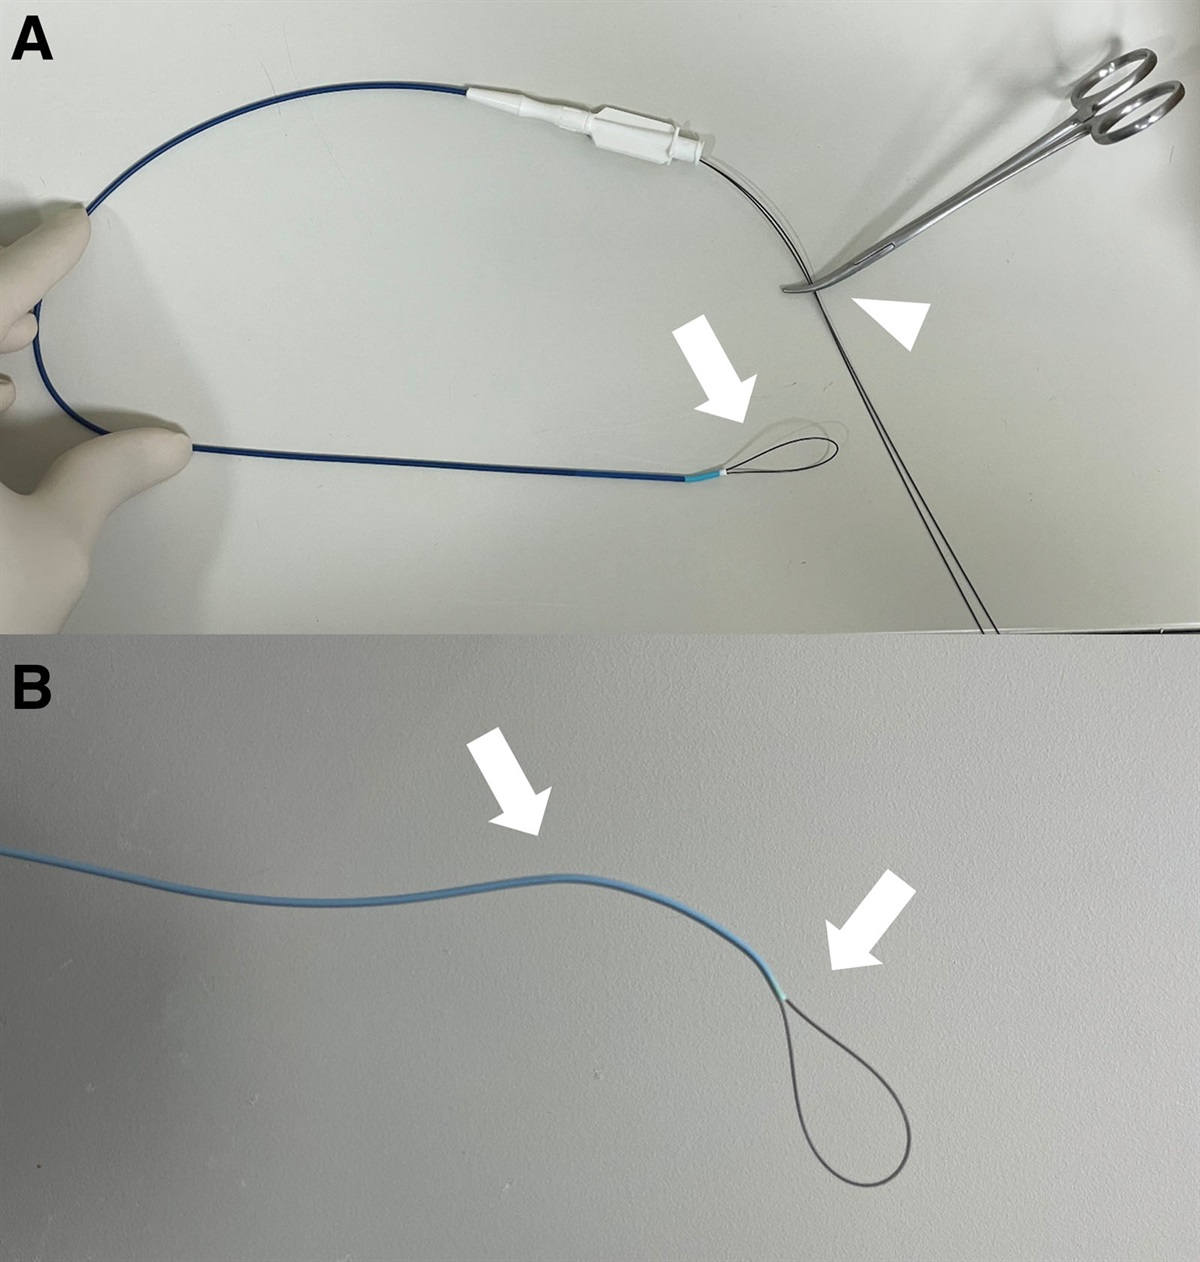 Technical feasibility and safety of the alternative snare technique using a 0.018-inch guide wire and 5-French catheter for double-J ureteral stent removal